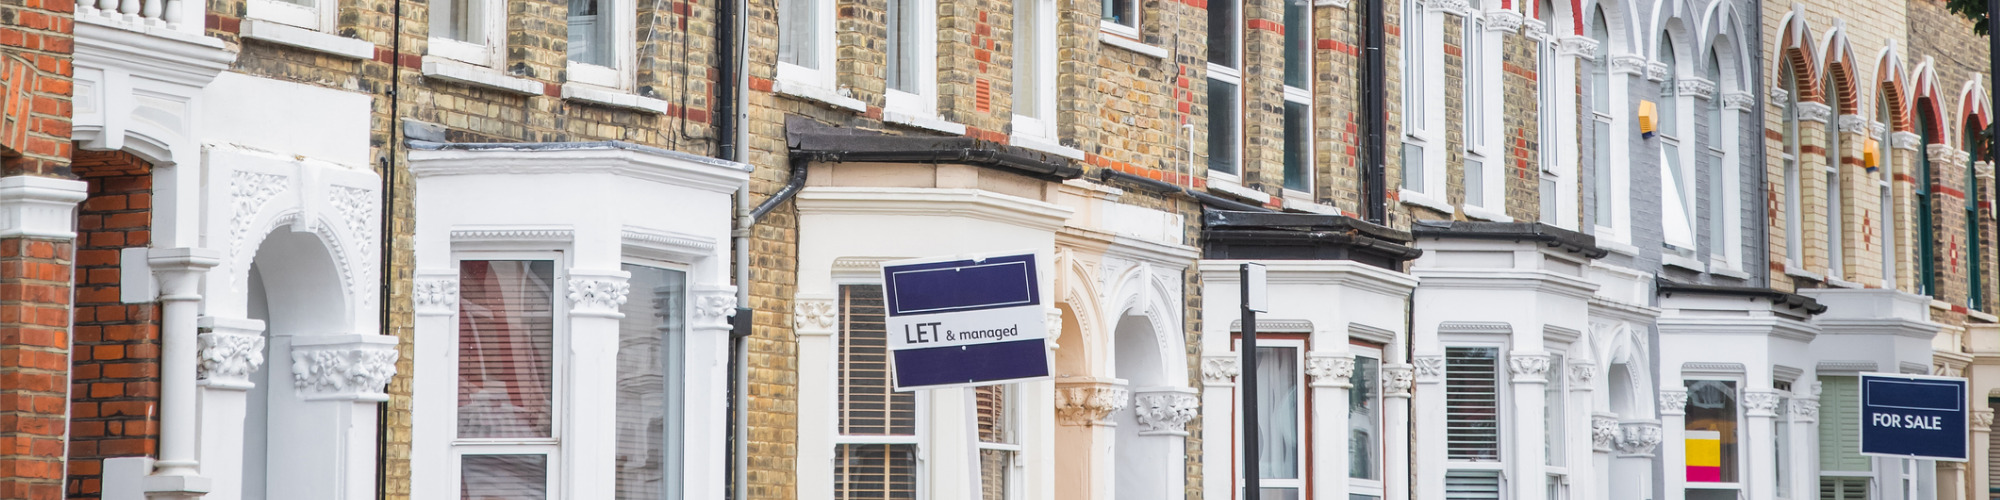 Short Residential Leases - A Roundup for Letting Agents